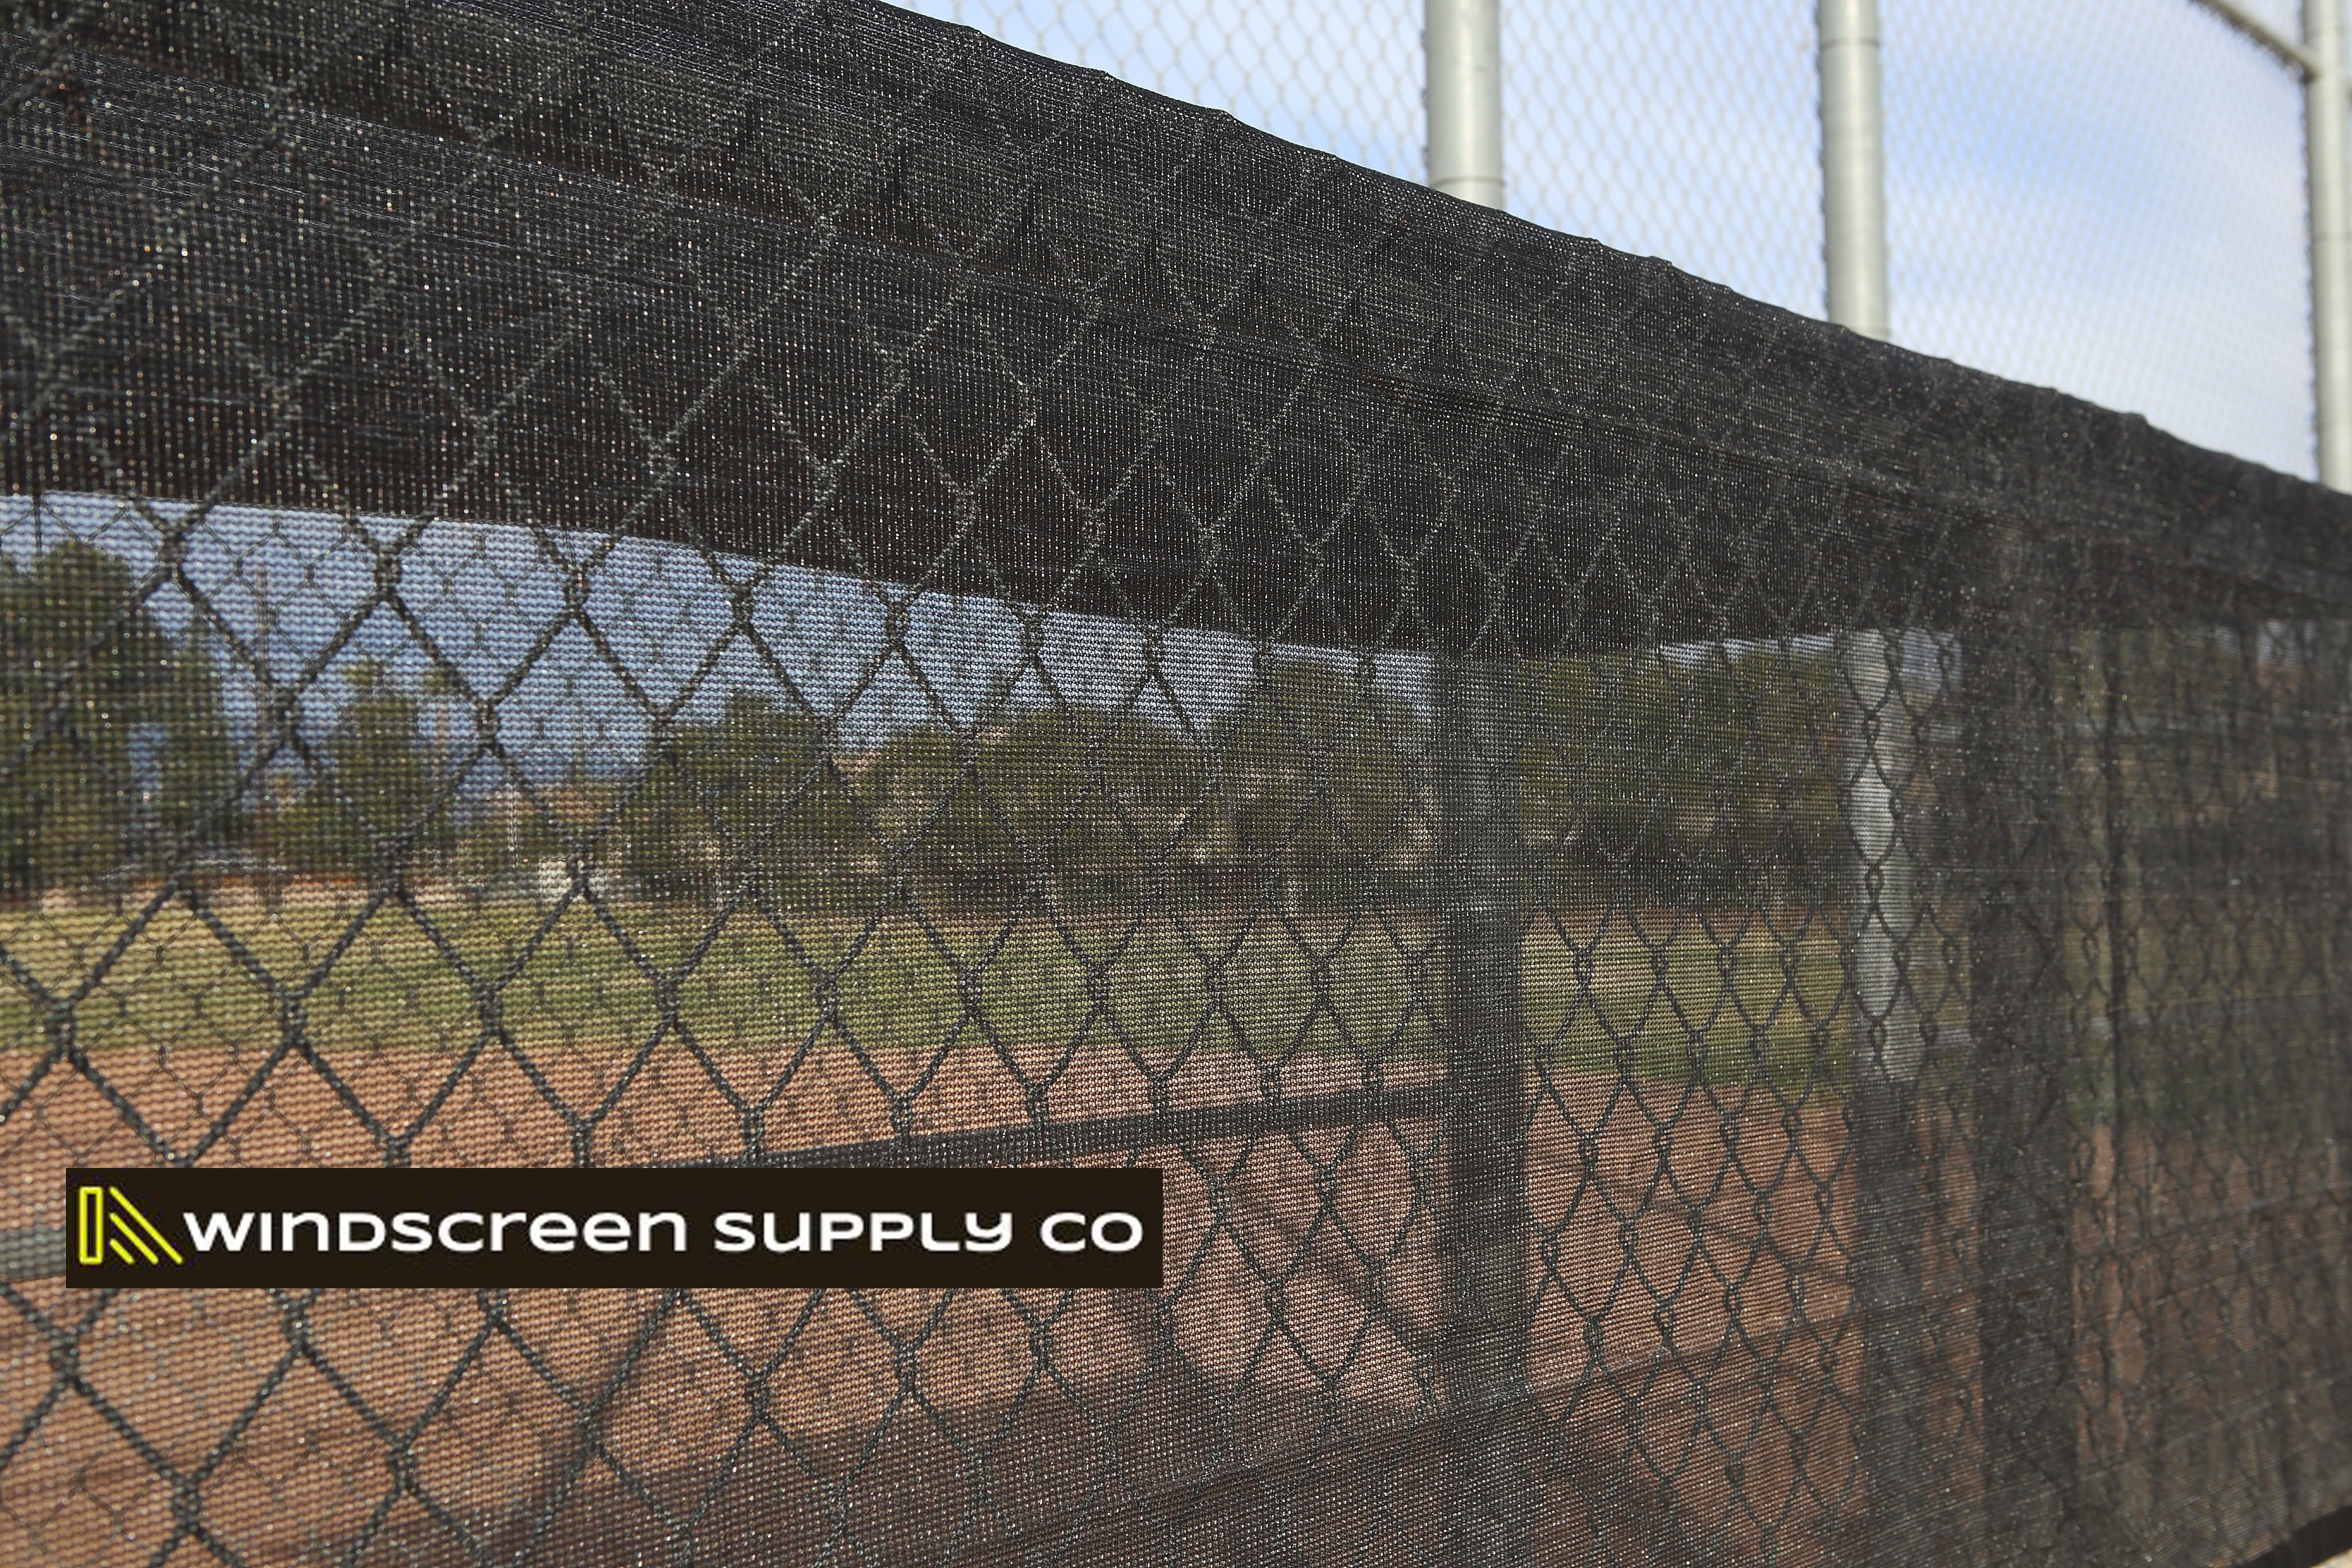 12 FT. X 24 FT. Windscreensupplyco Heavy Duty Black Knitted Mesh Tarp with Grommets 60-70% Shade 